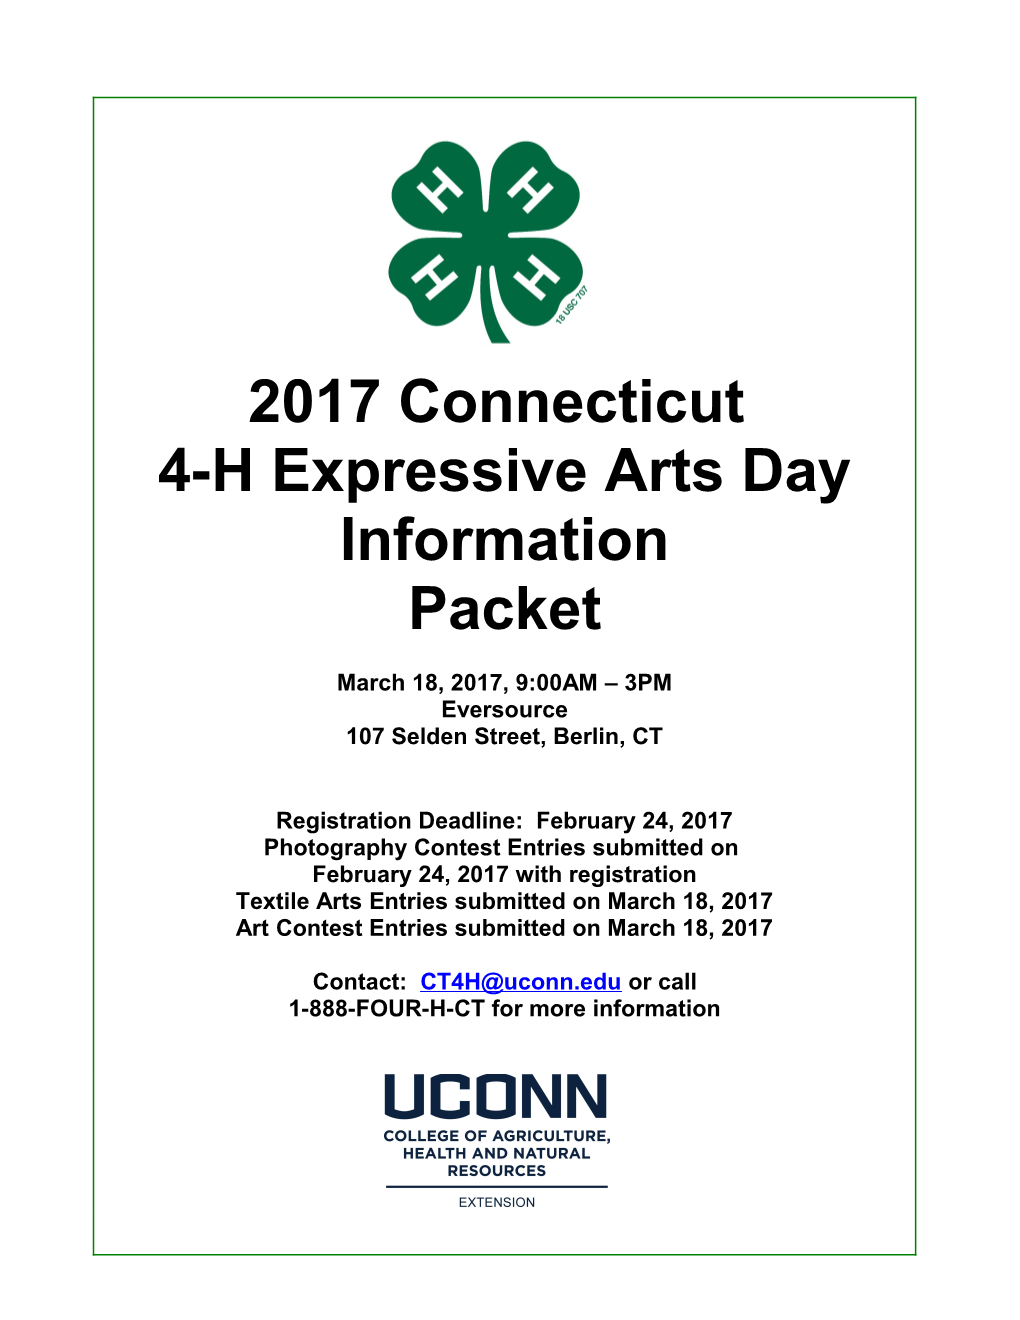 Connecticut 4-H Expressive Arts Day